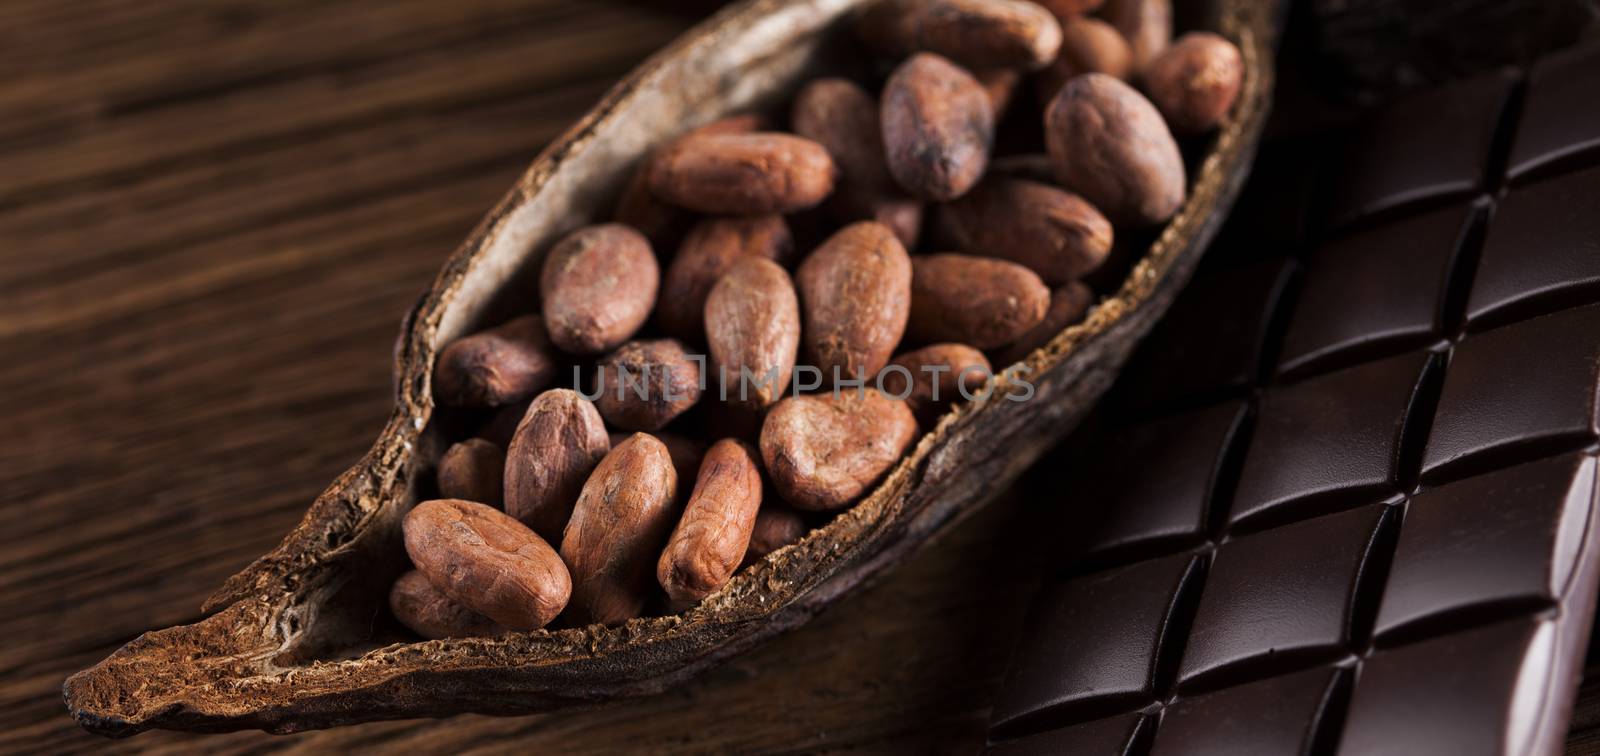 Cocoa pod and cocoa beans on the wooden table by JanPietruszka